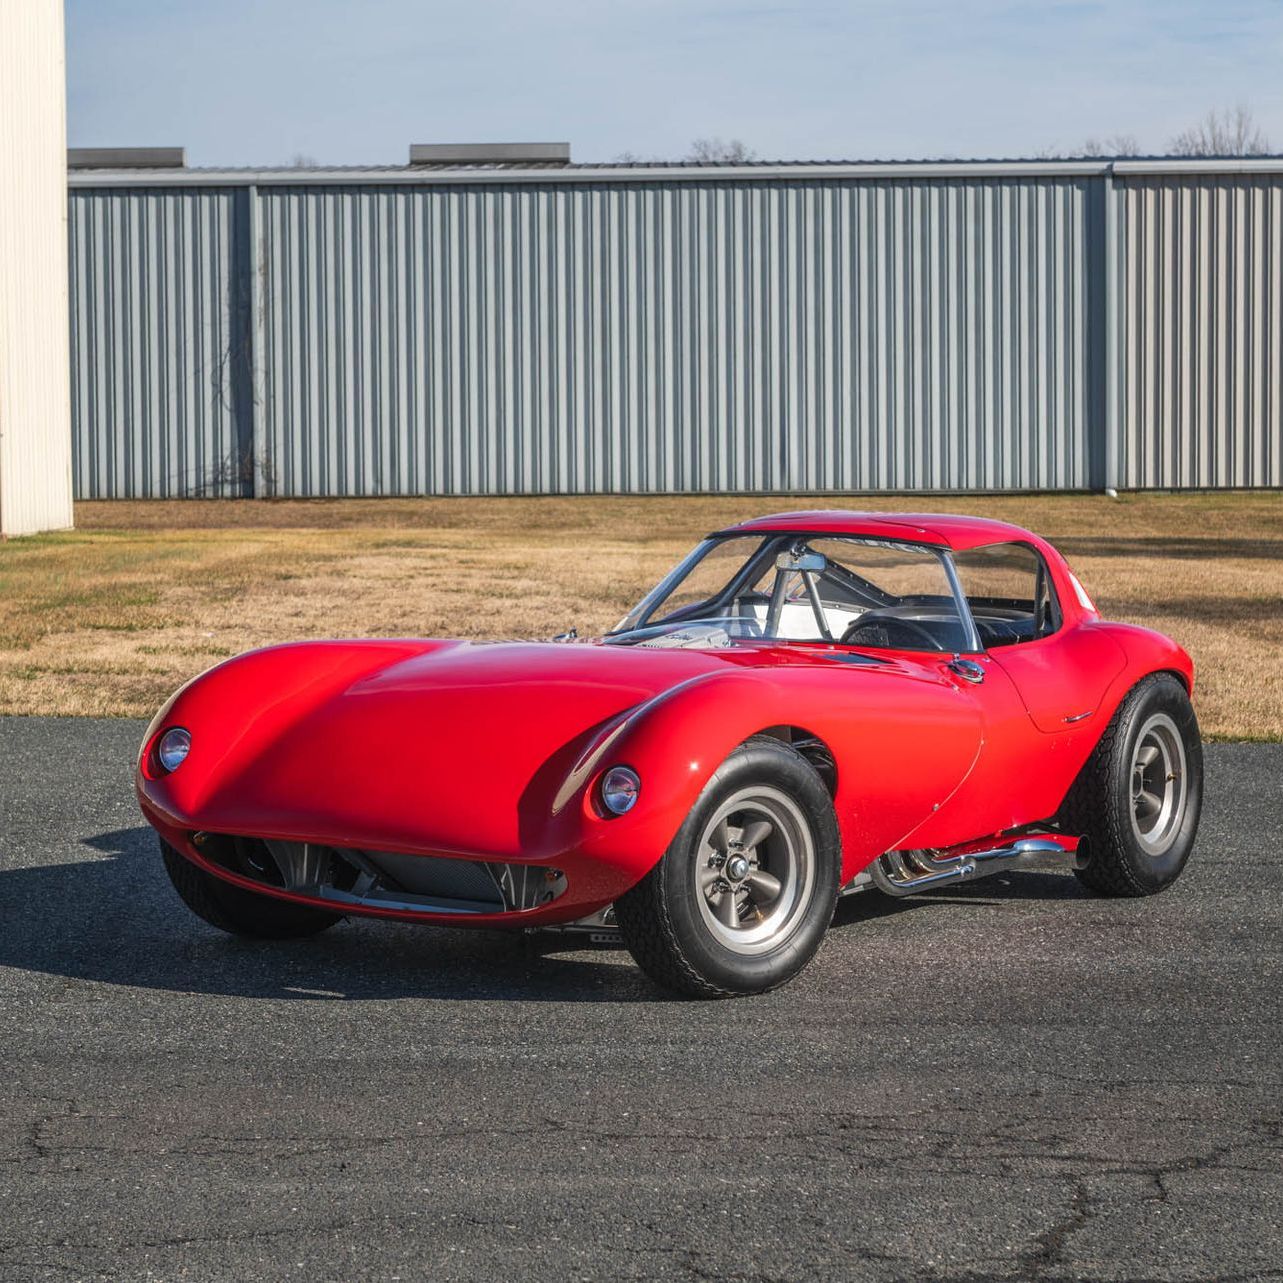 This Prototype Was GM's Shelby Cobra Competitor. Now You Can Own It